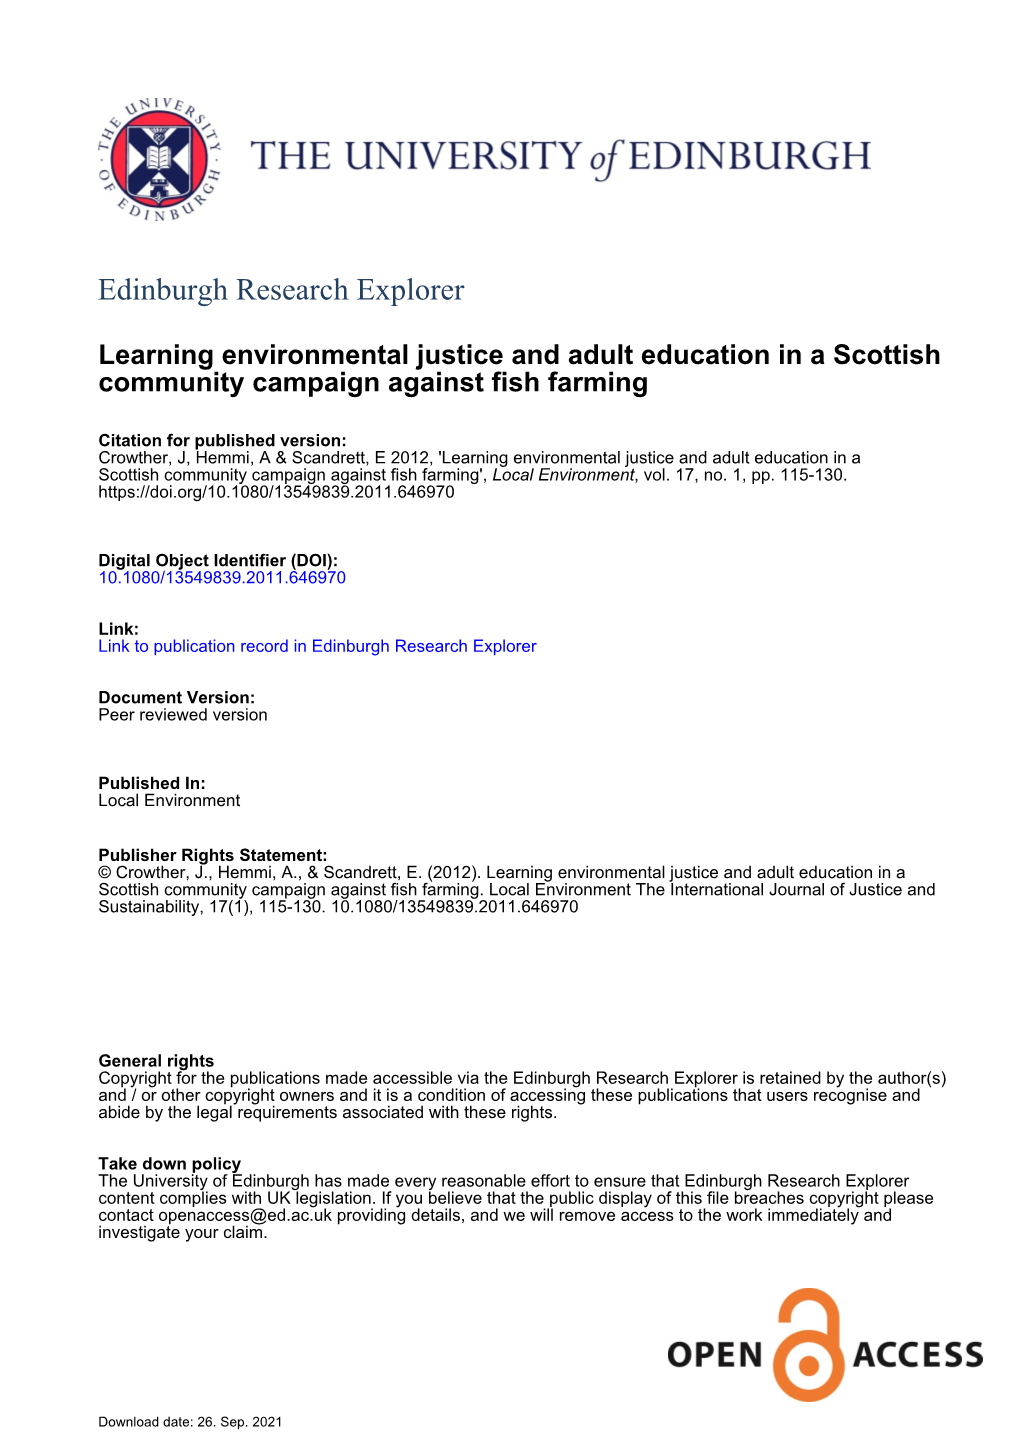 Learning Environmental Justice and Adult Education in a Scottish Community Campaign Against Fish Farming